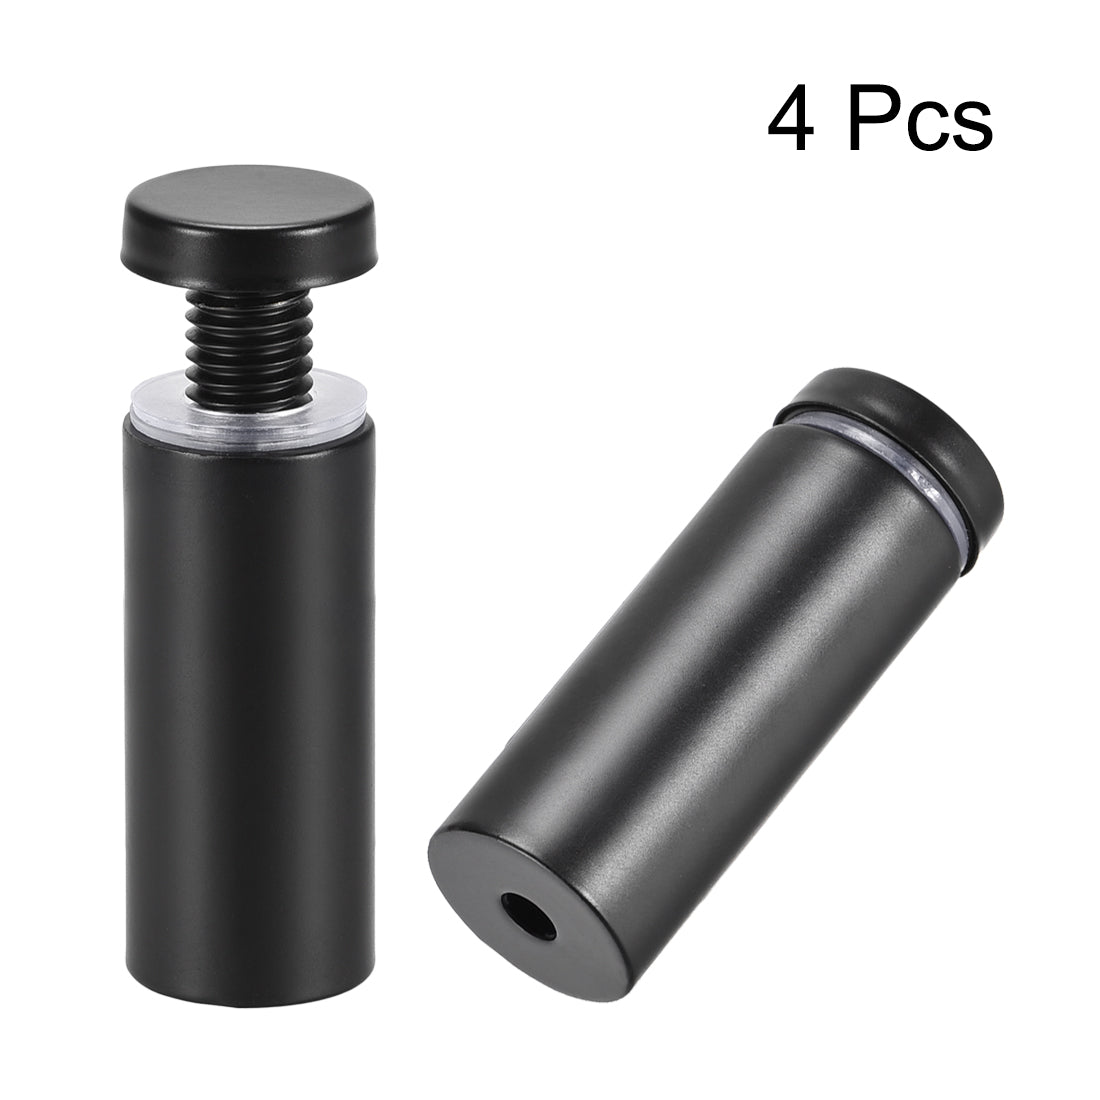 uxcell Uxcell Glass Standoff Mount Stainless Steel Wall Standoff Holder Advertising Nails 19mm Dia 51mm Length Black , 4 Pcs